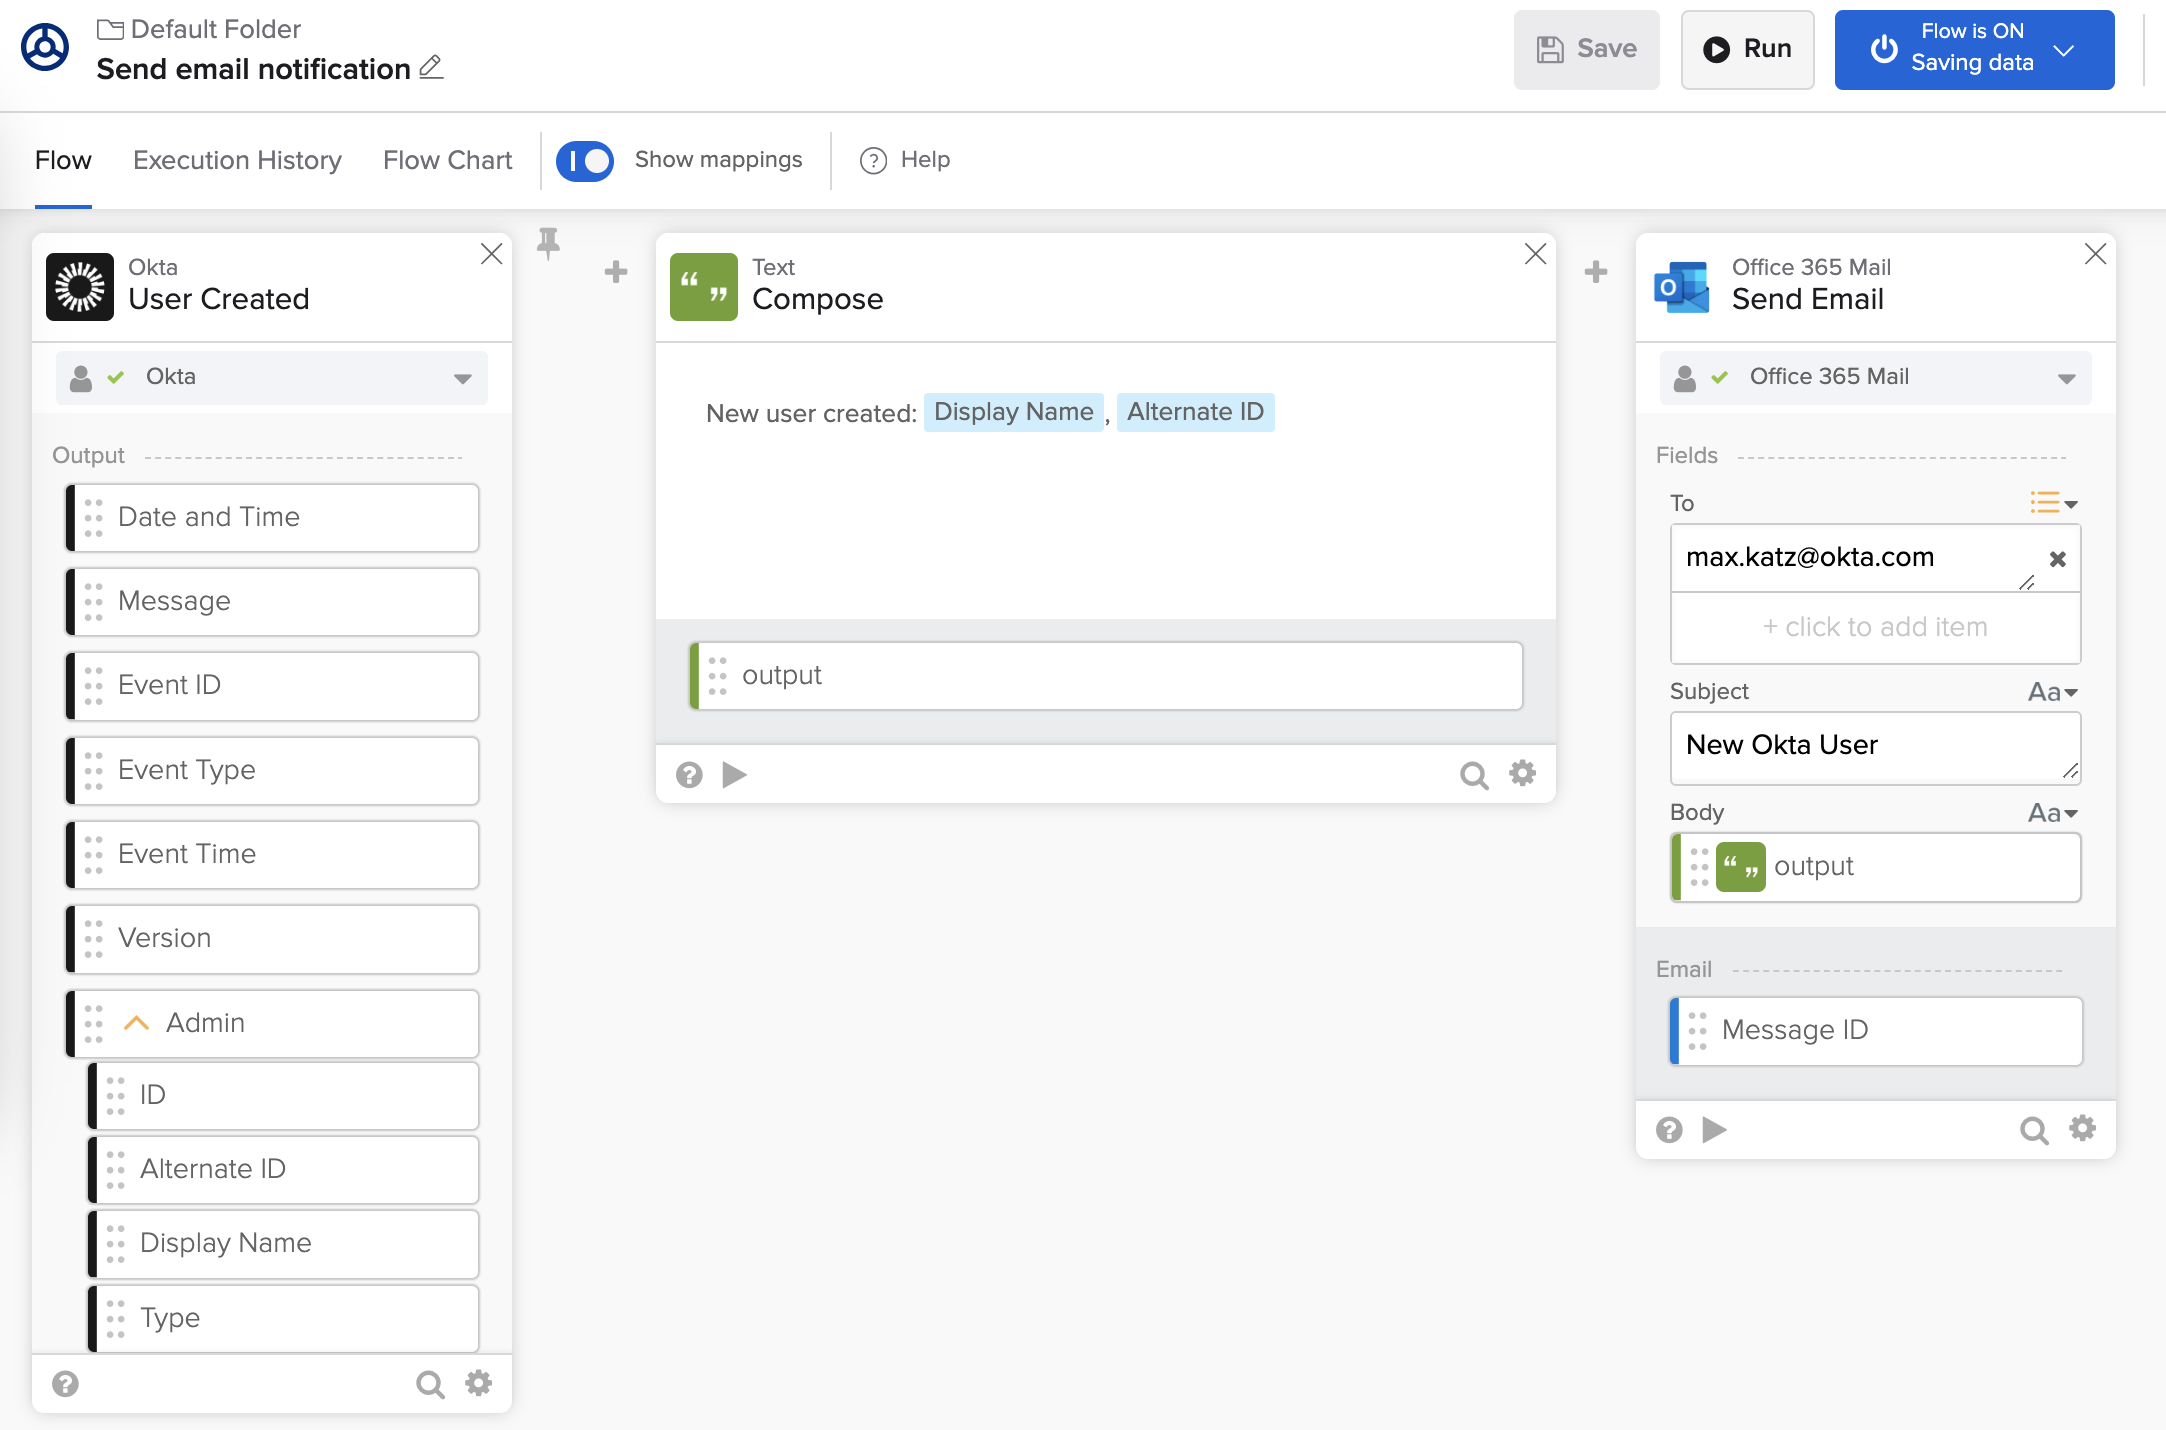 workflows_ms_notify_email_final_flow.png (2166×1430)